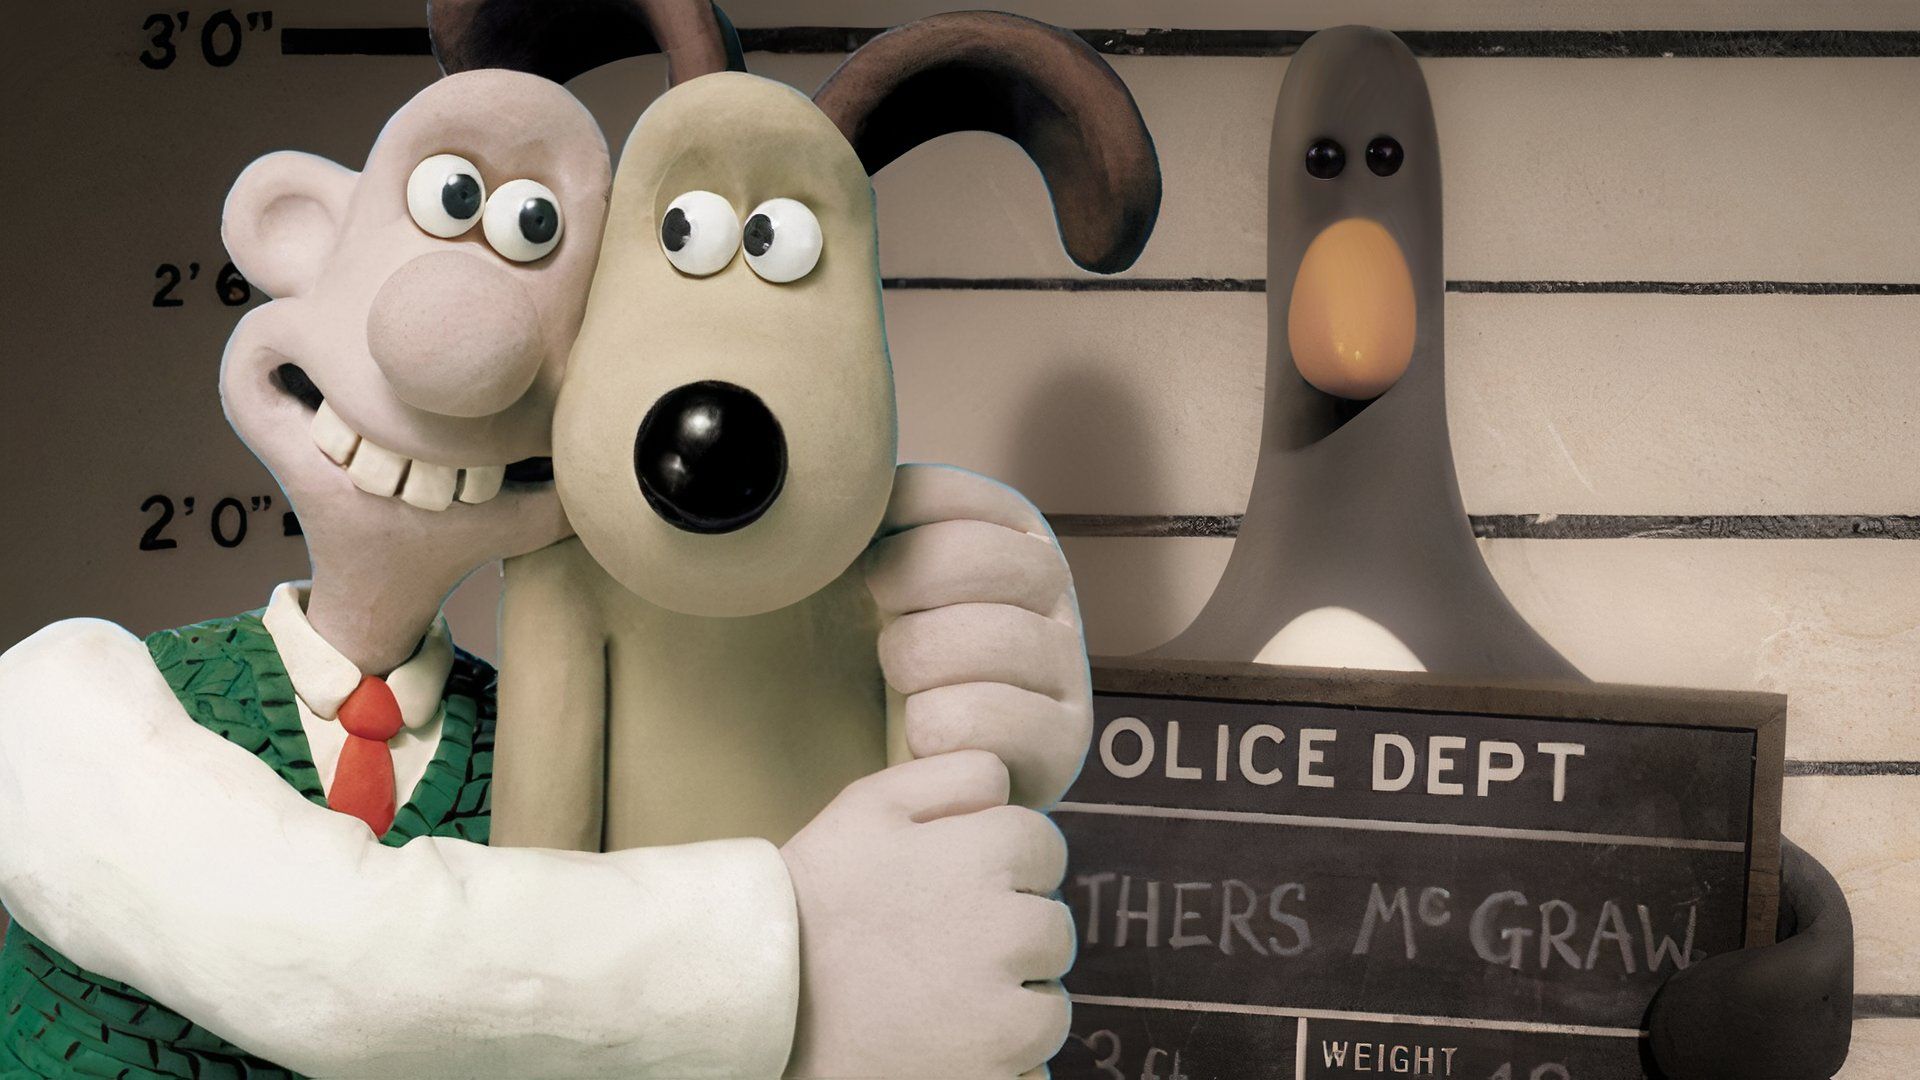 Wallace and Gromit hugging alongside Feathers McGraw.